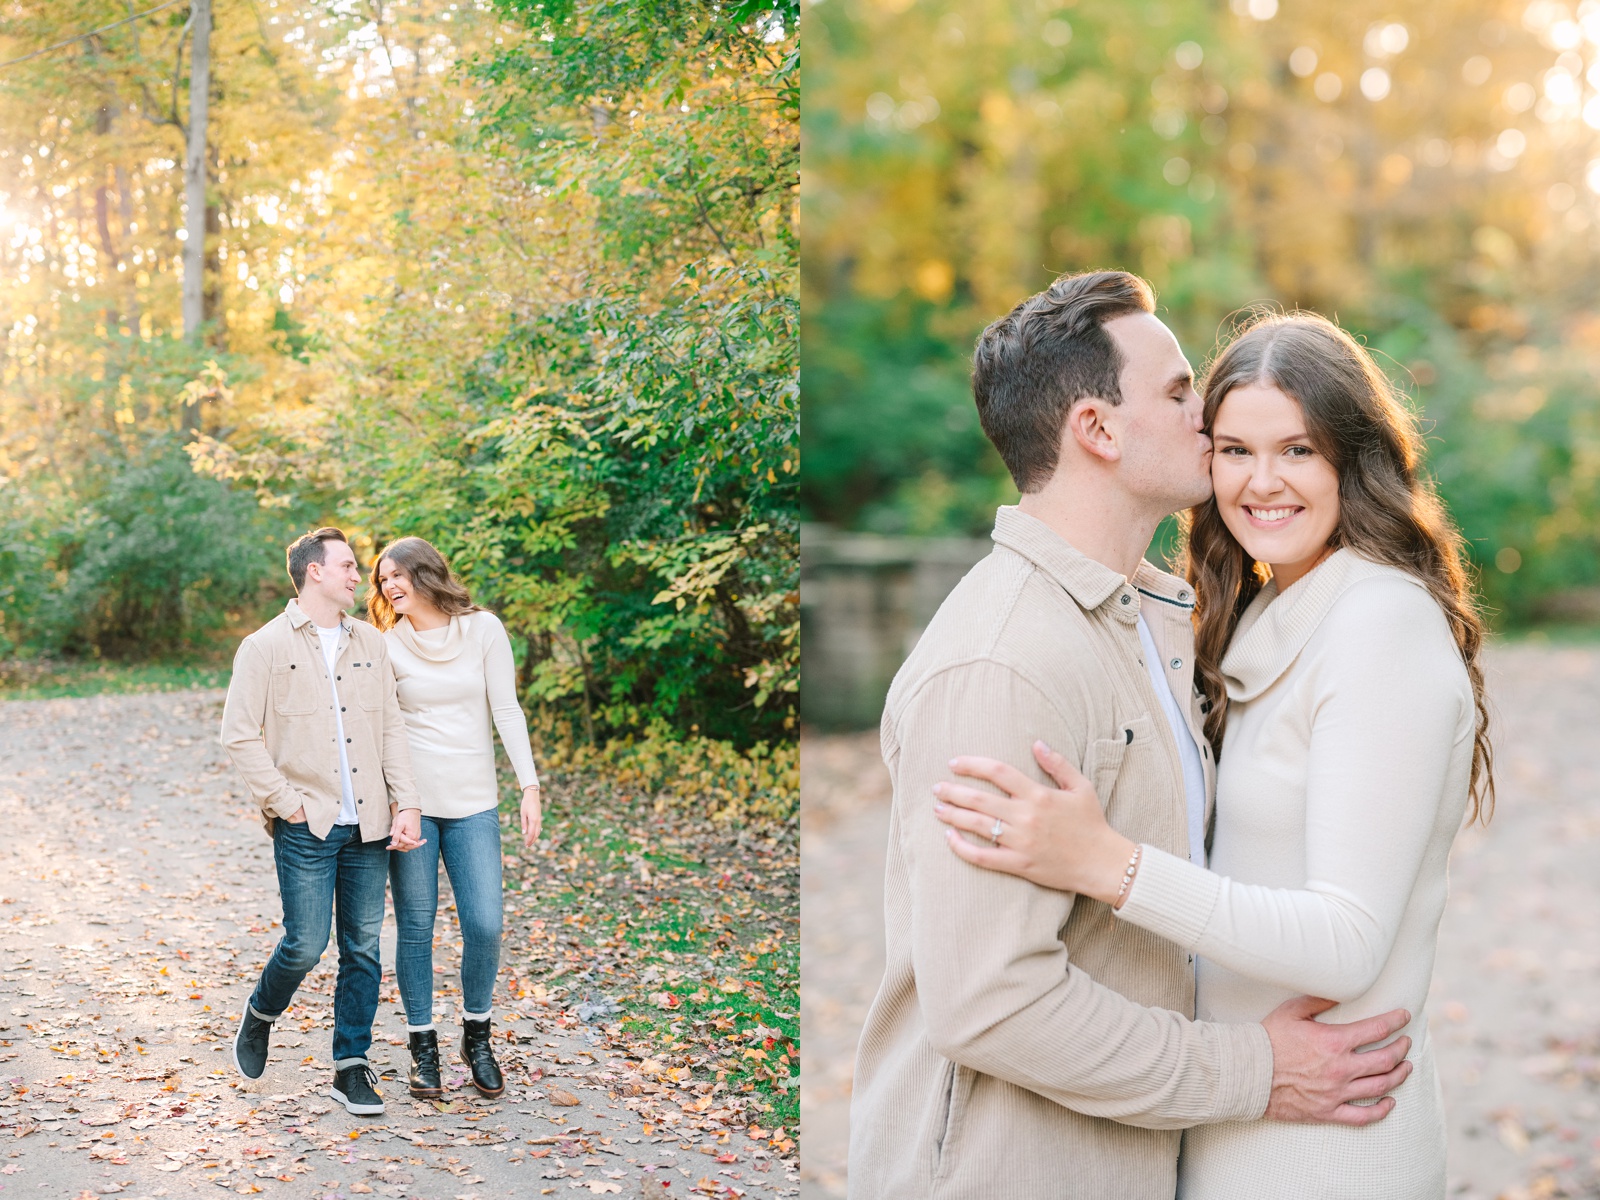 Fall Engagement Session at David Fortier River Park in Olmsted Falls, Ohio